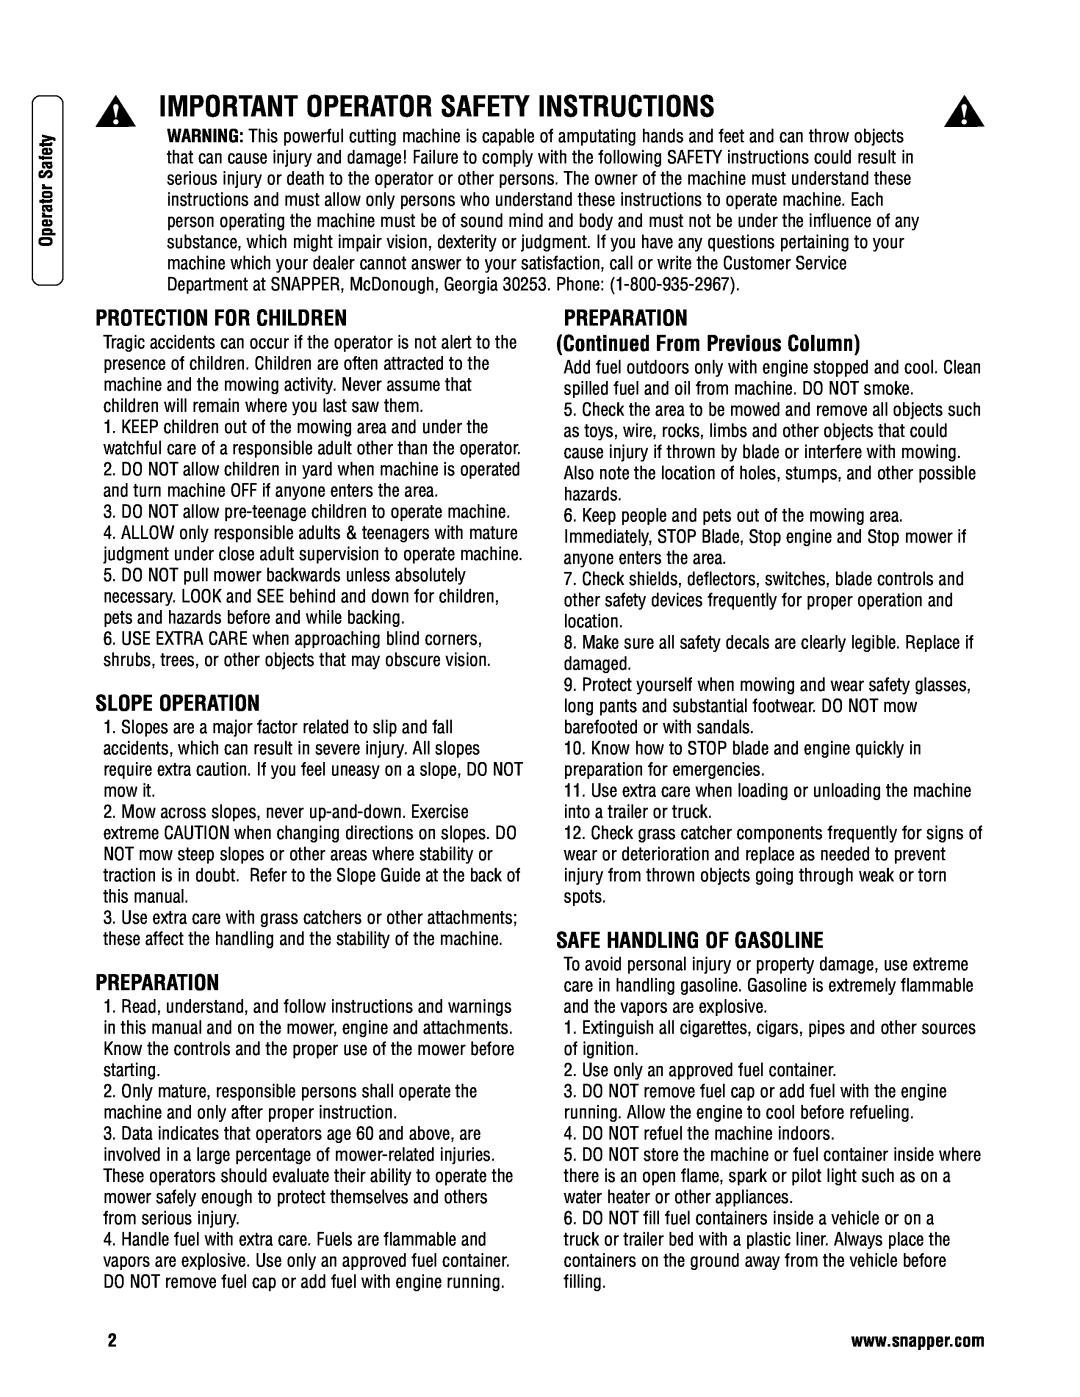 Briggs & Stratton NSPVH21675 Important Operator Safety Instructions, Protection For Children, Slope Operation, Preparation 